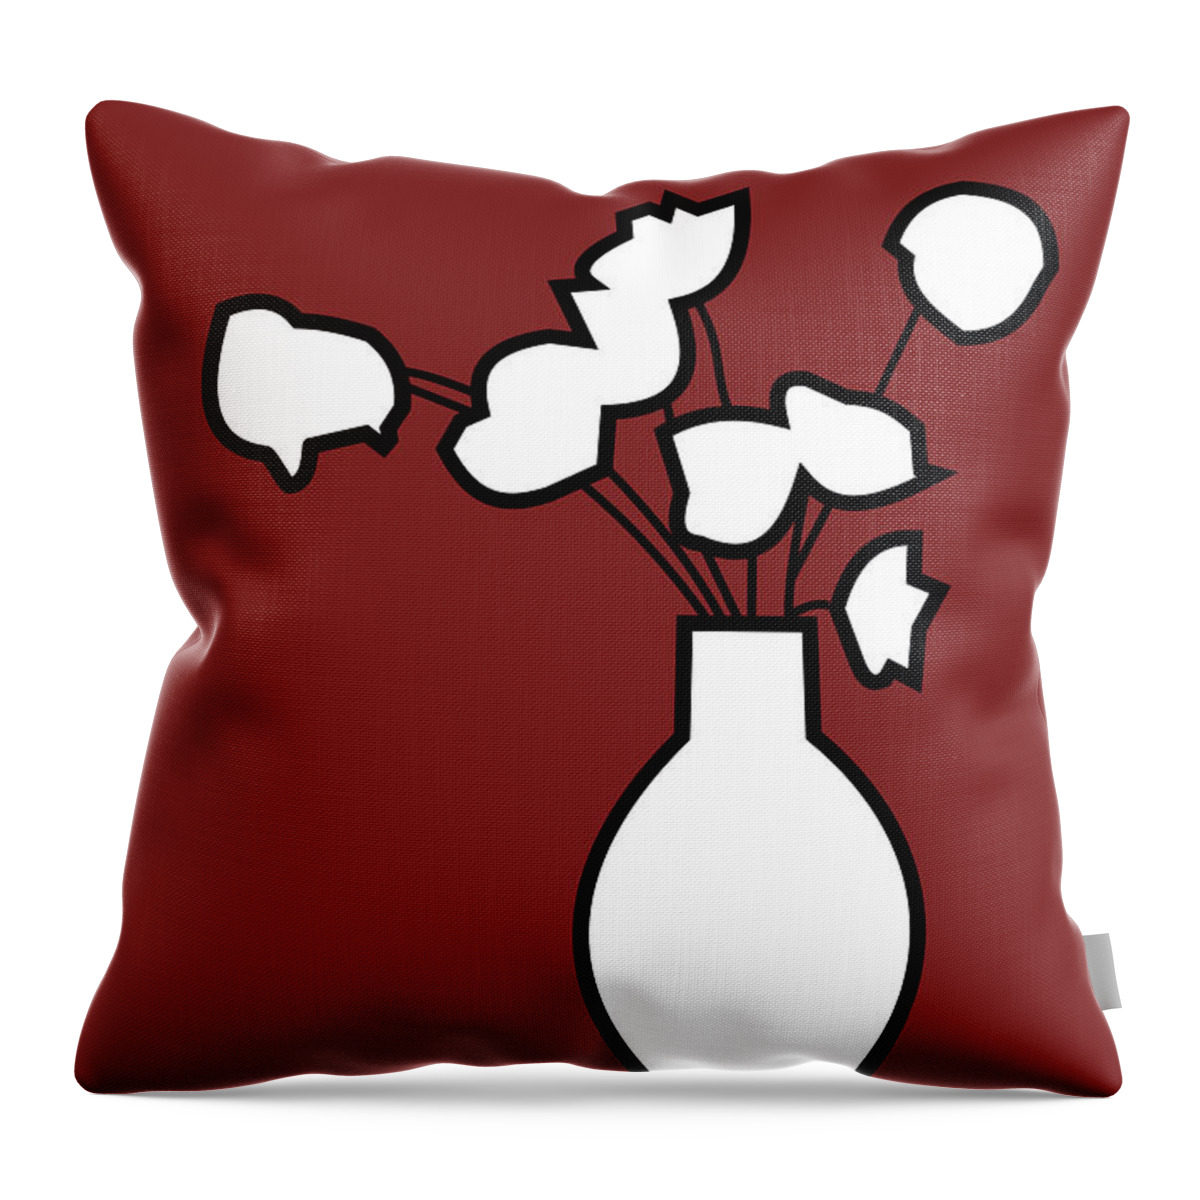 Poppy Throw Pillow featuring the digital art Vase of poppies by Fatline Graphic Art